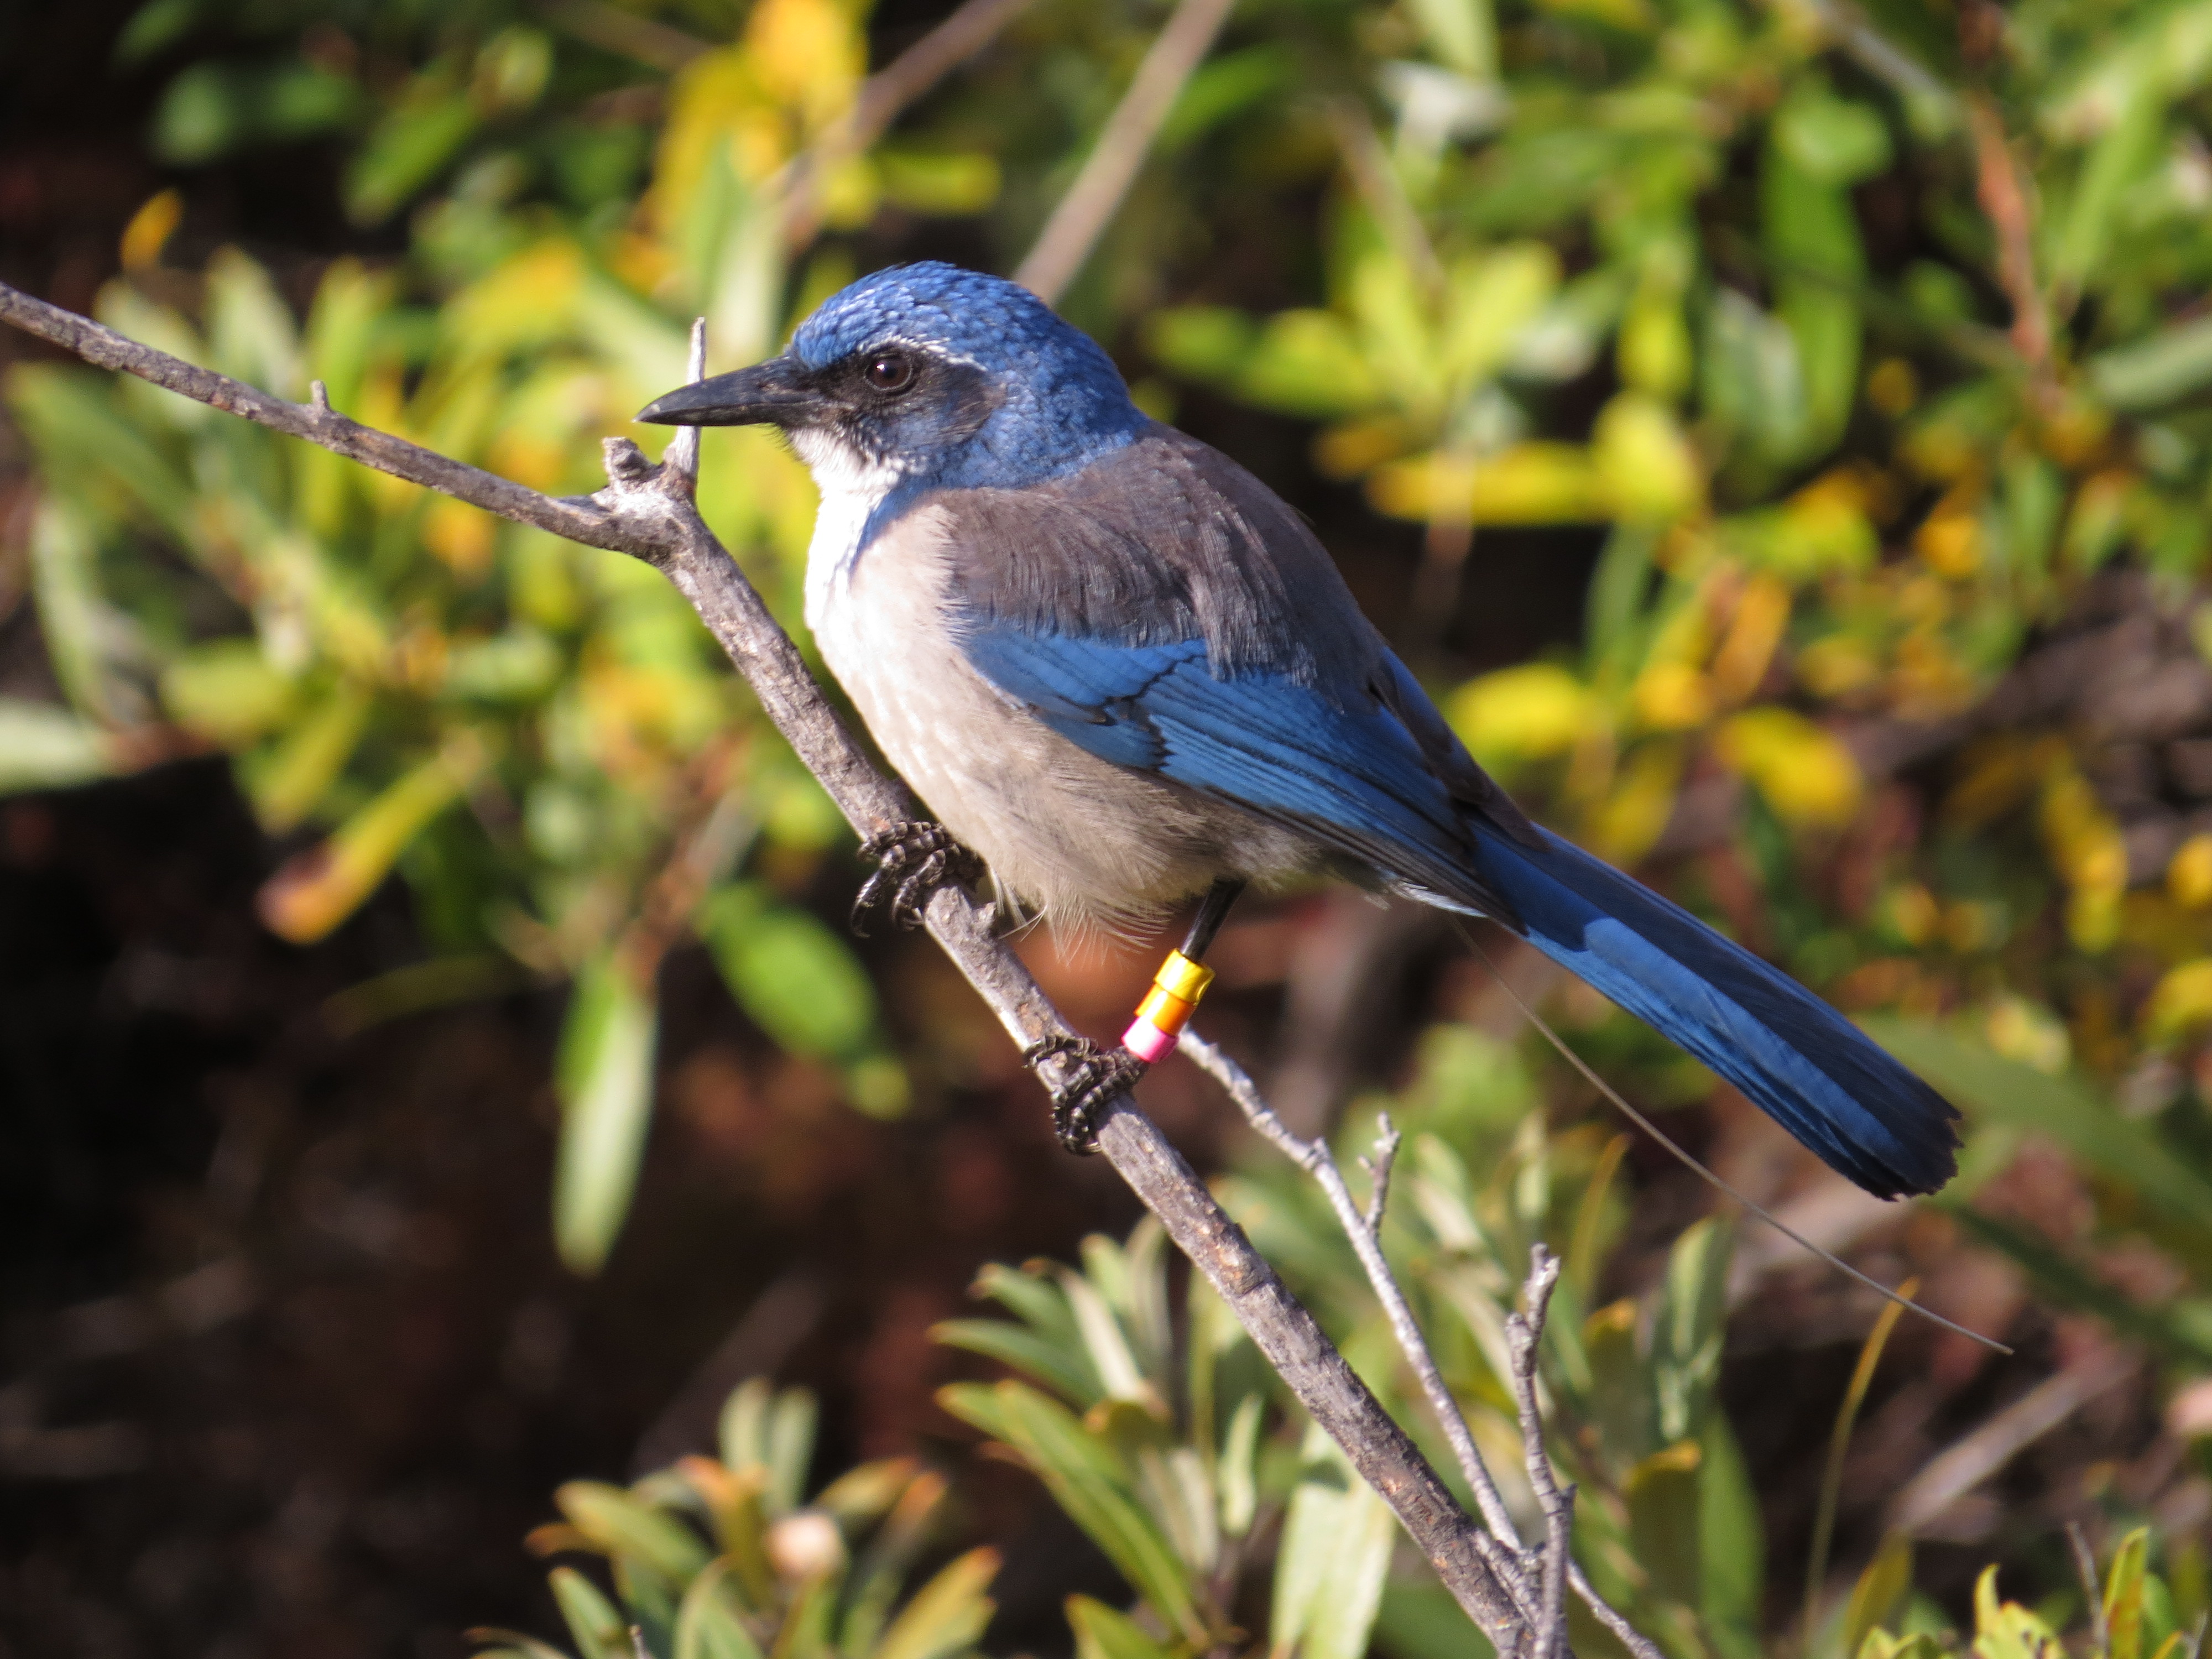 An Island Scrub-Jay with leg bands and telemetry antenna visible